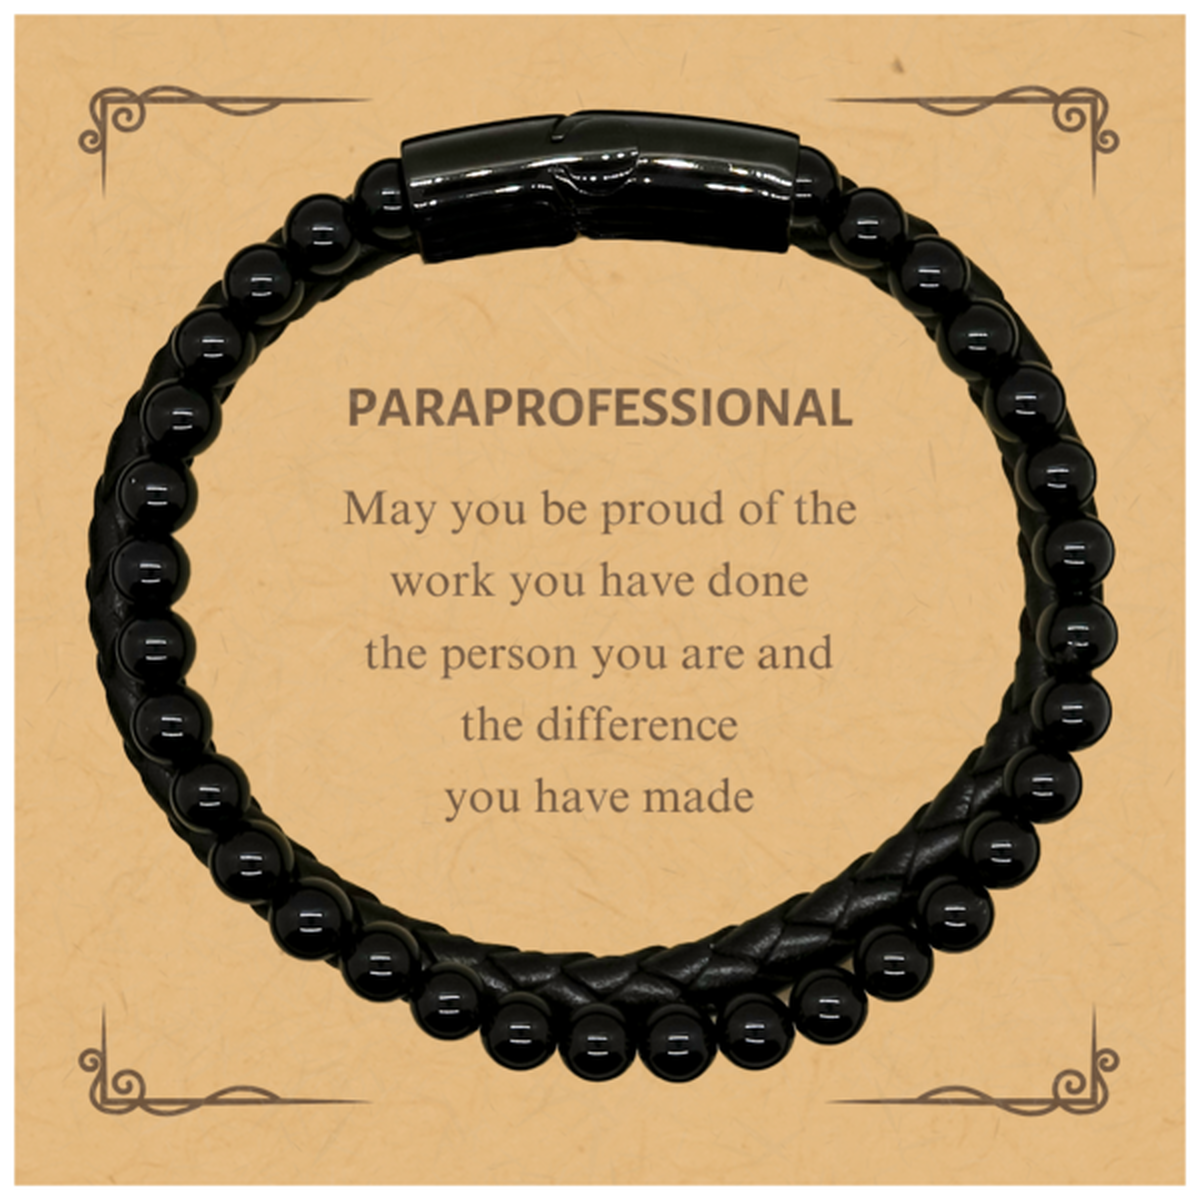 Paraprofessional May you be proud of the work you have done, Retirement Paraprofessional Stone Leather Bracelets for Colleague Appreciation Gifts Amazing for Paraprofessional